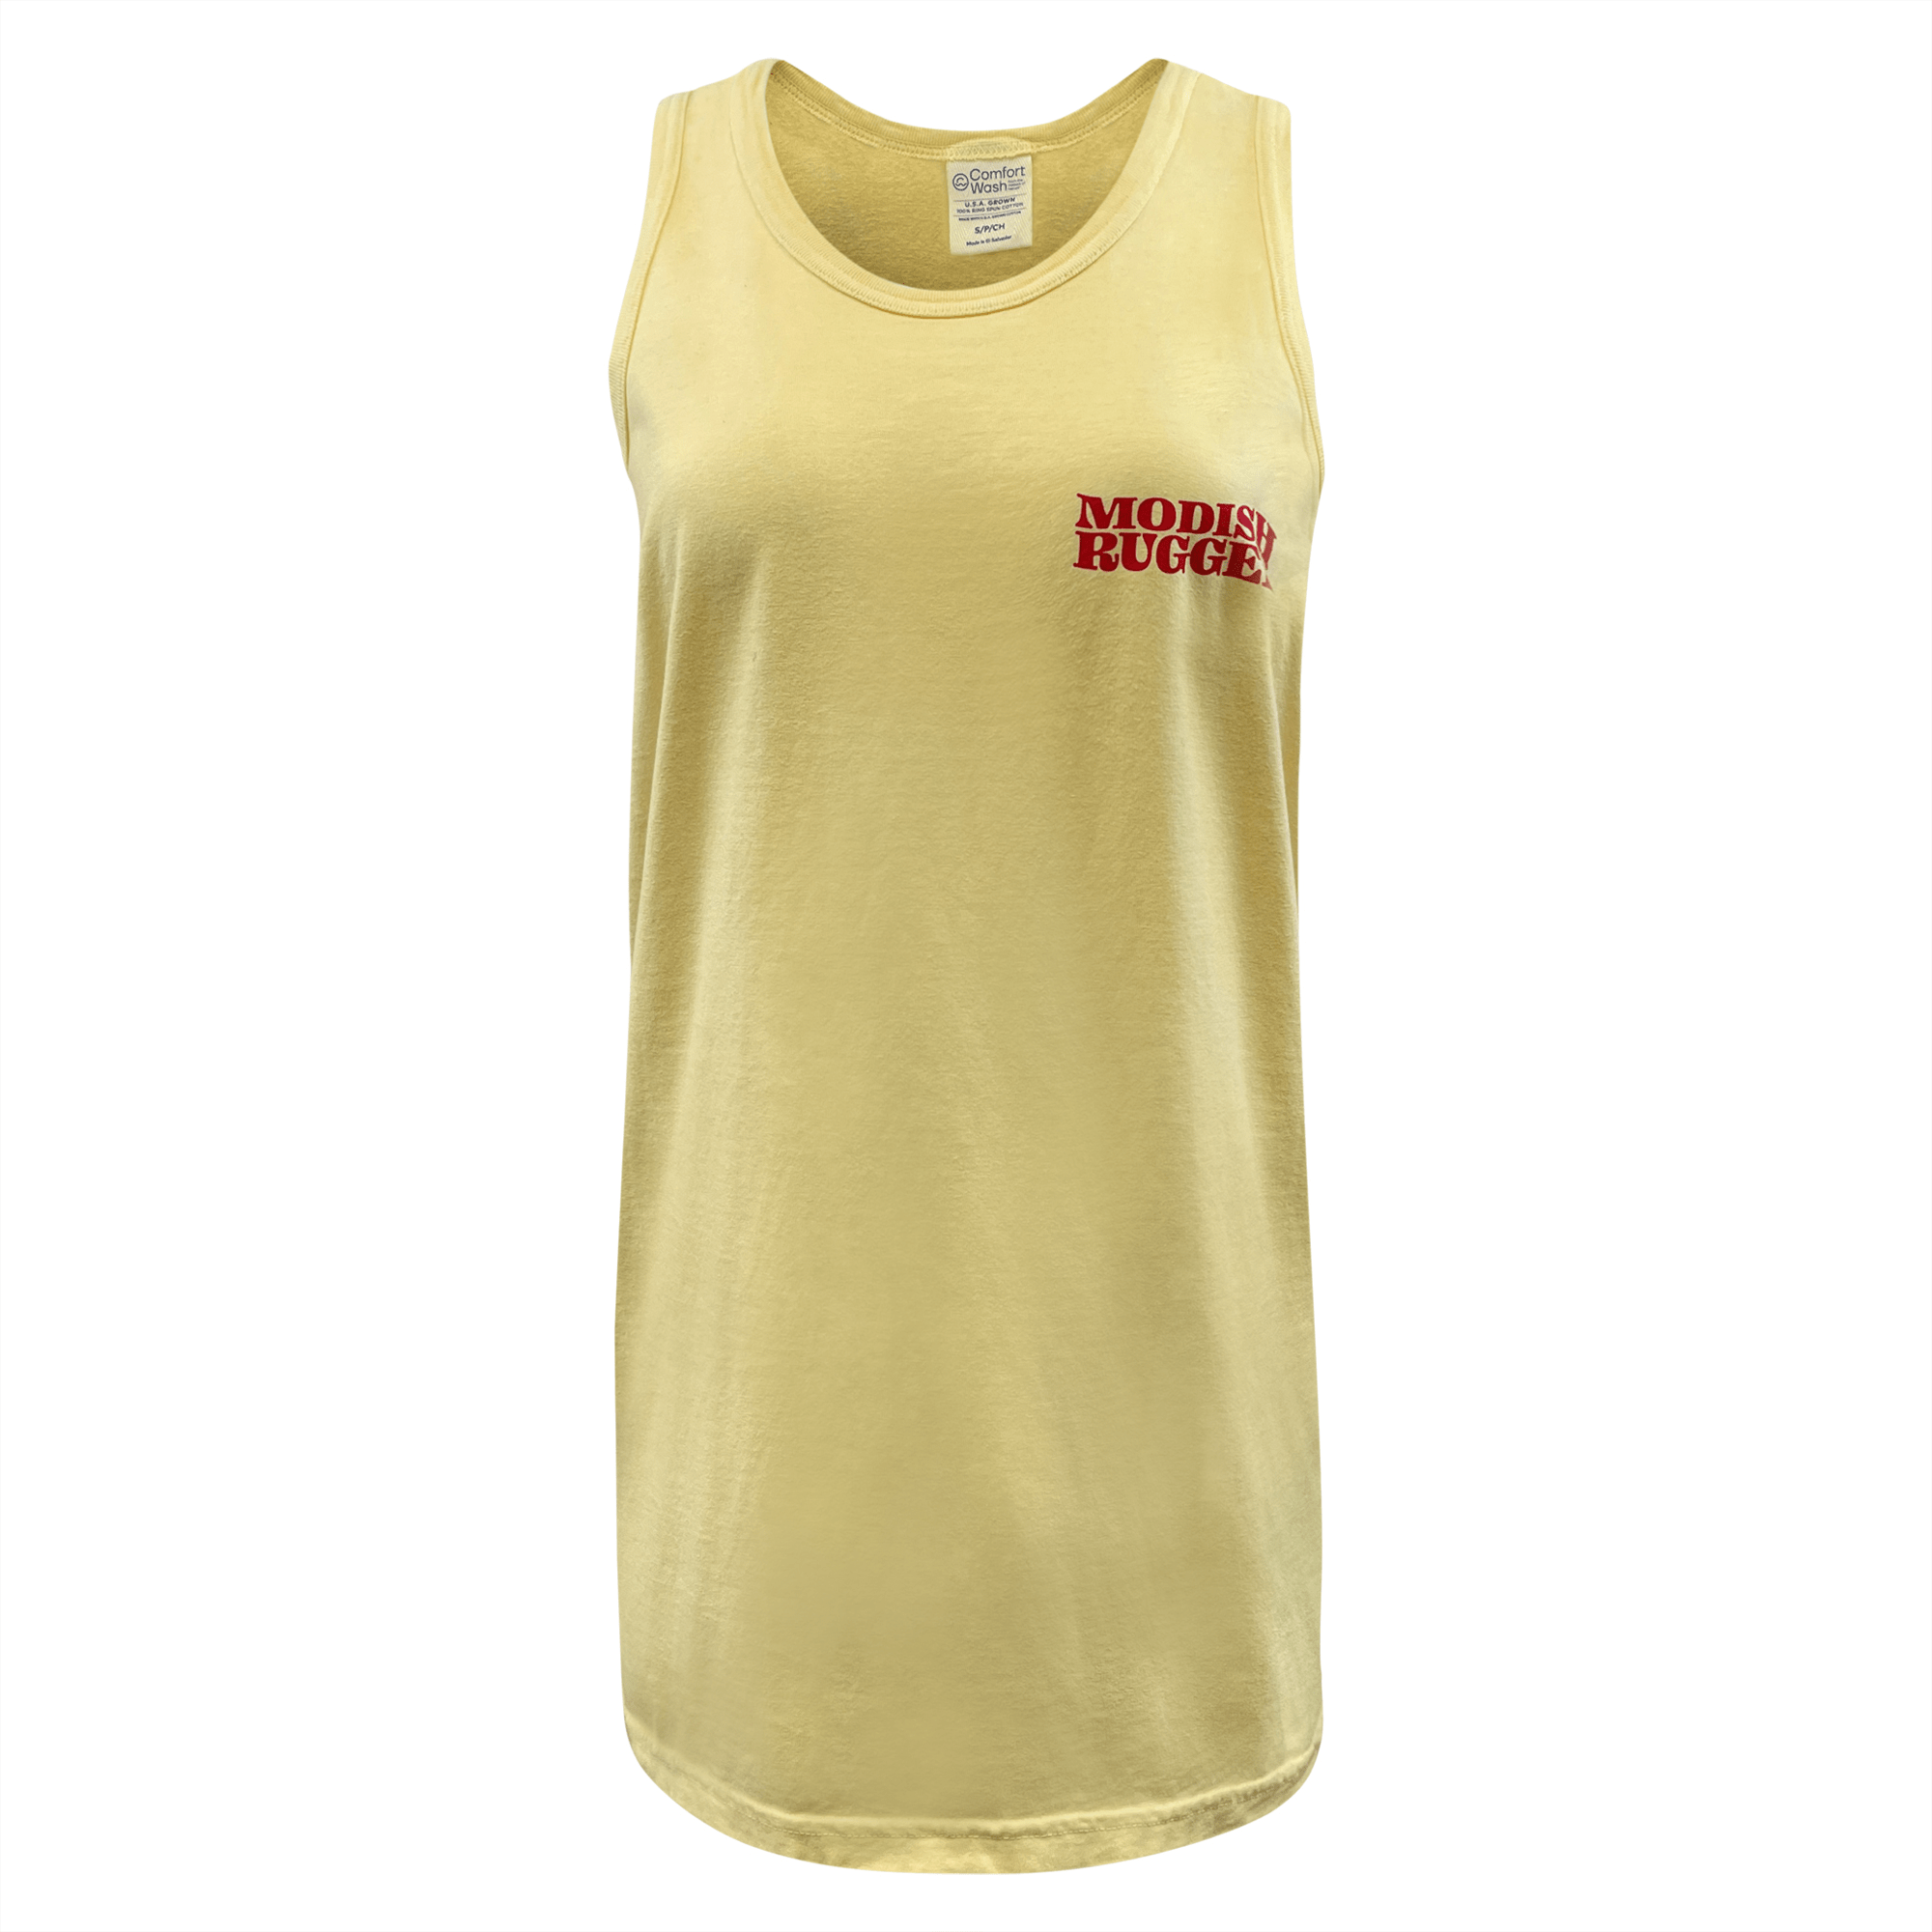 Image of Saturday's a Rugby Day Tank Top by Modish Rugger